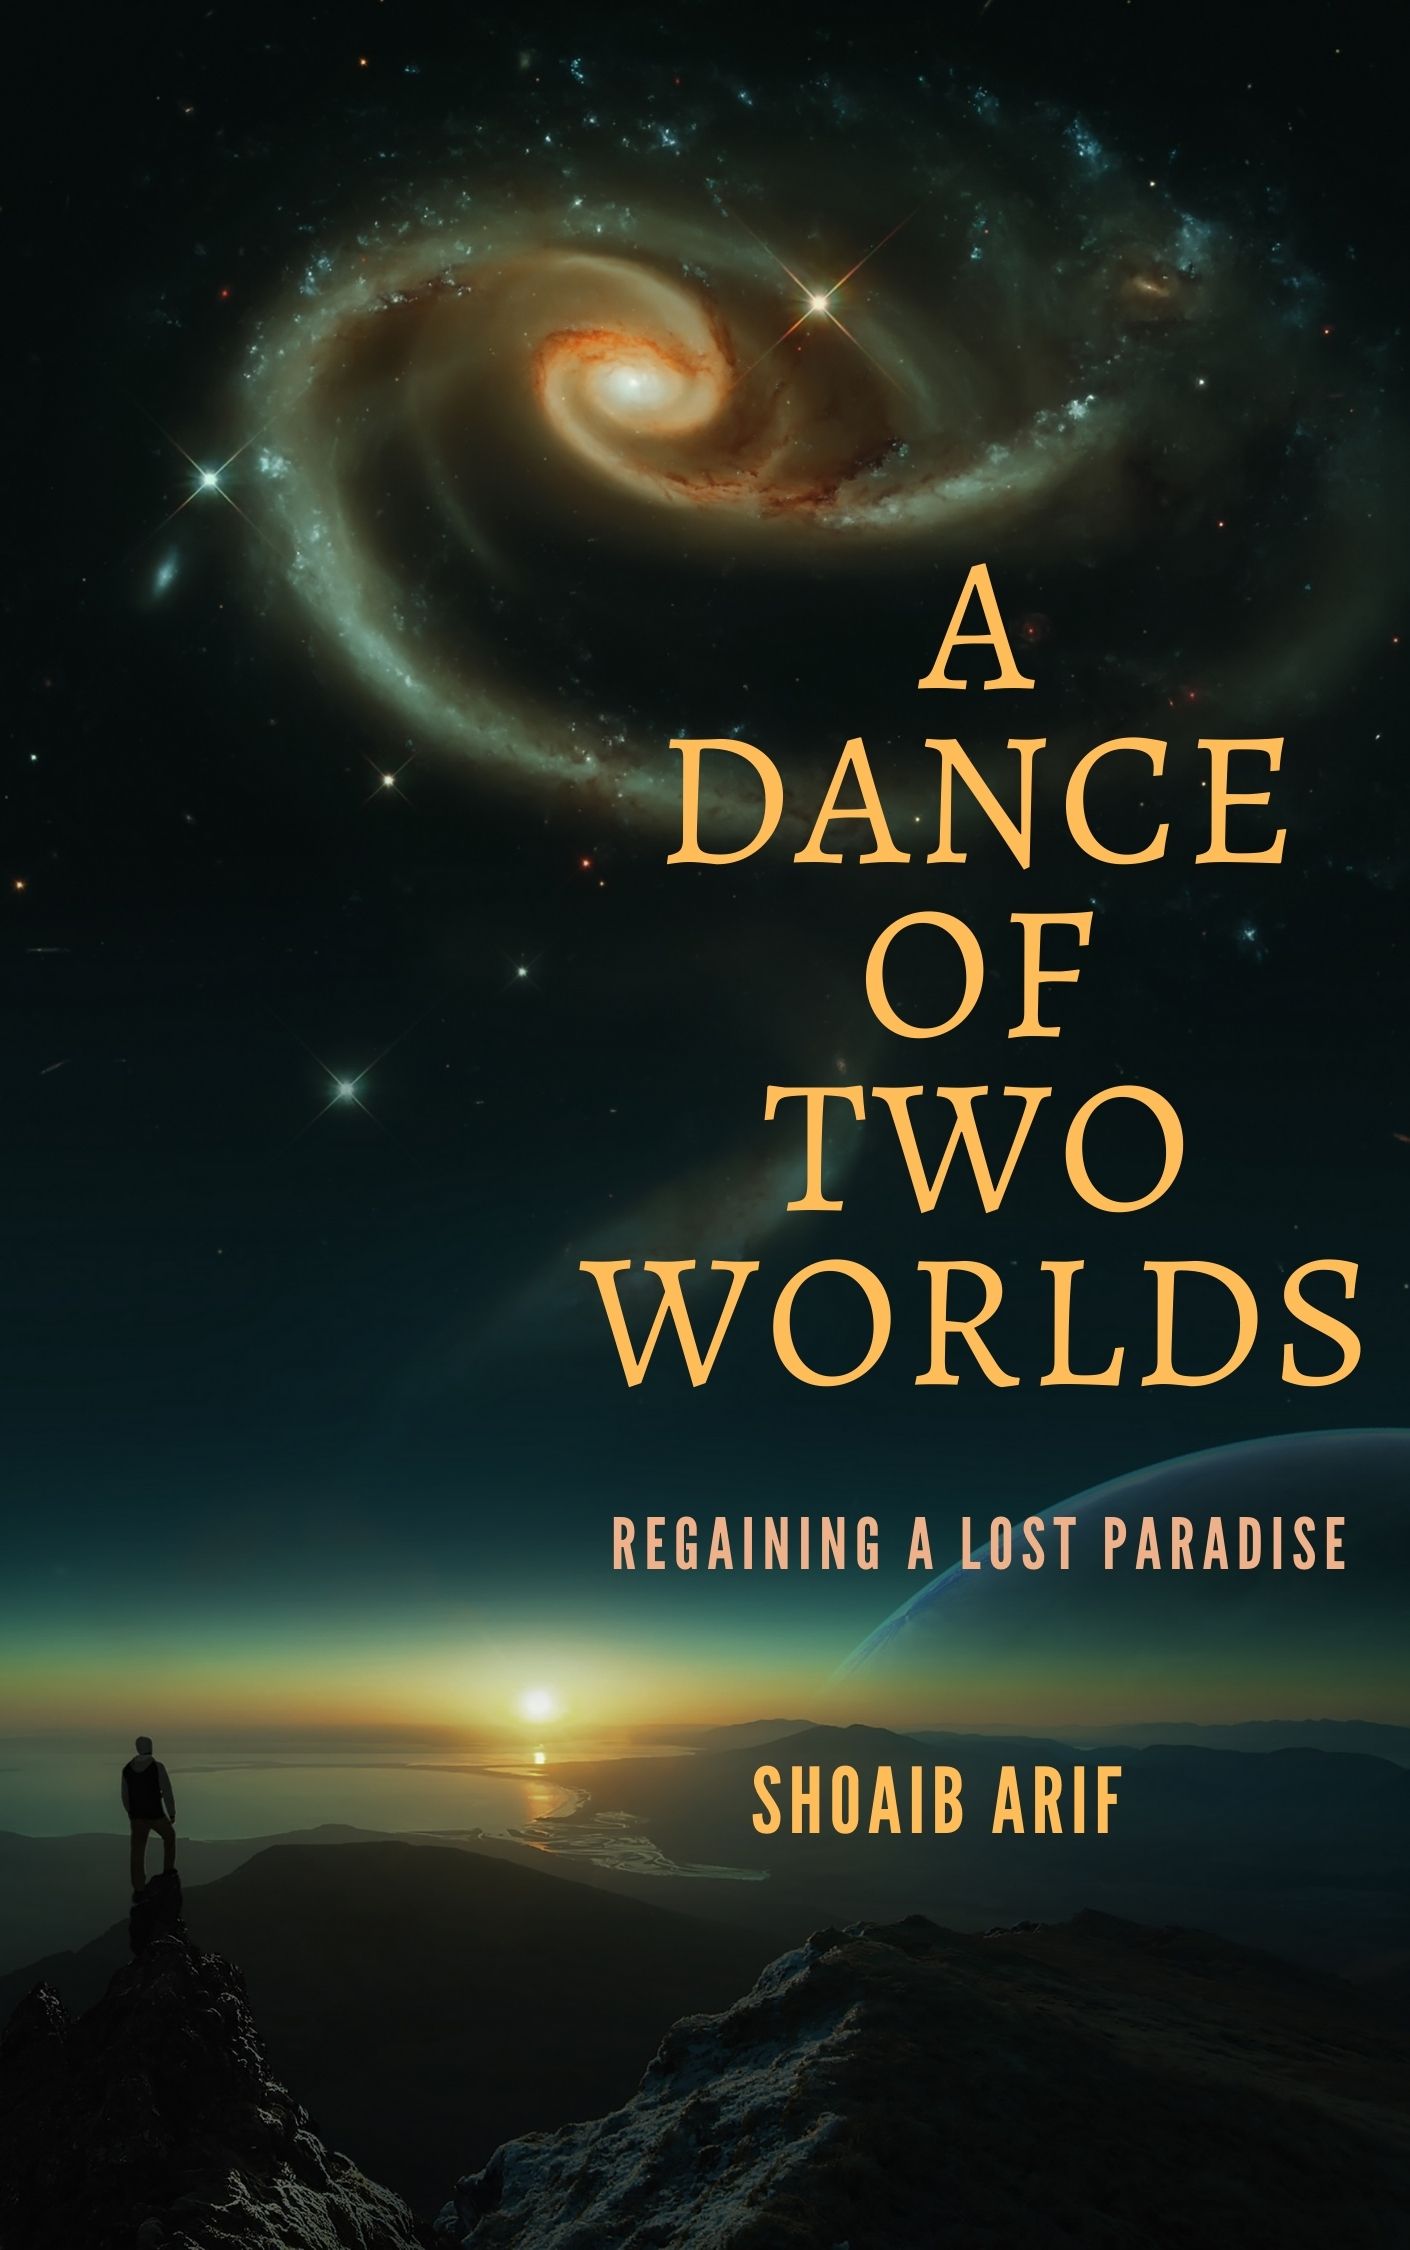 FREE: A Dance of Two Worlds by Shoaib Arif